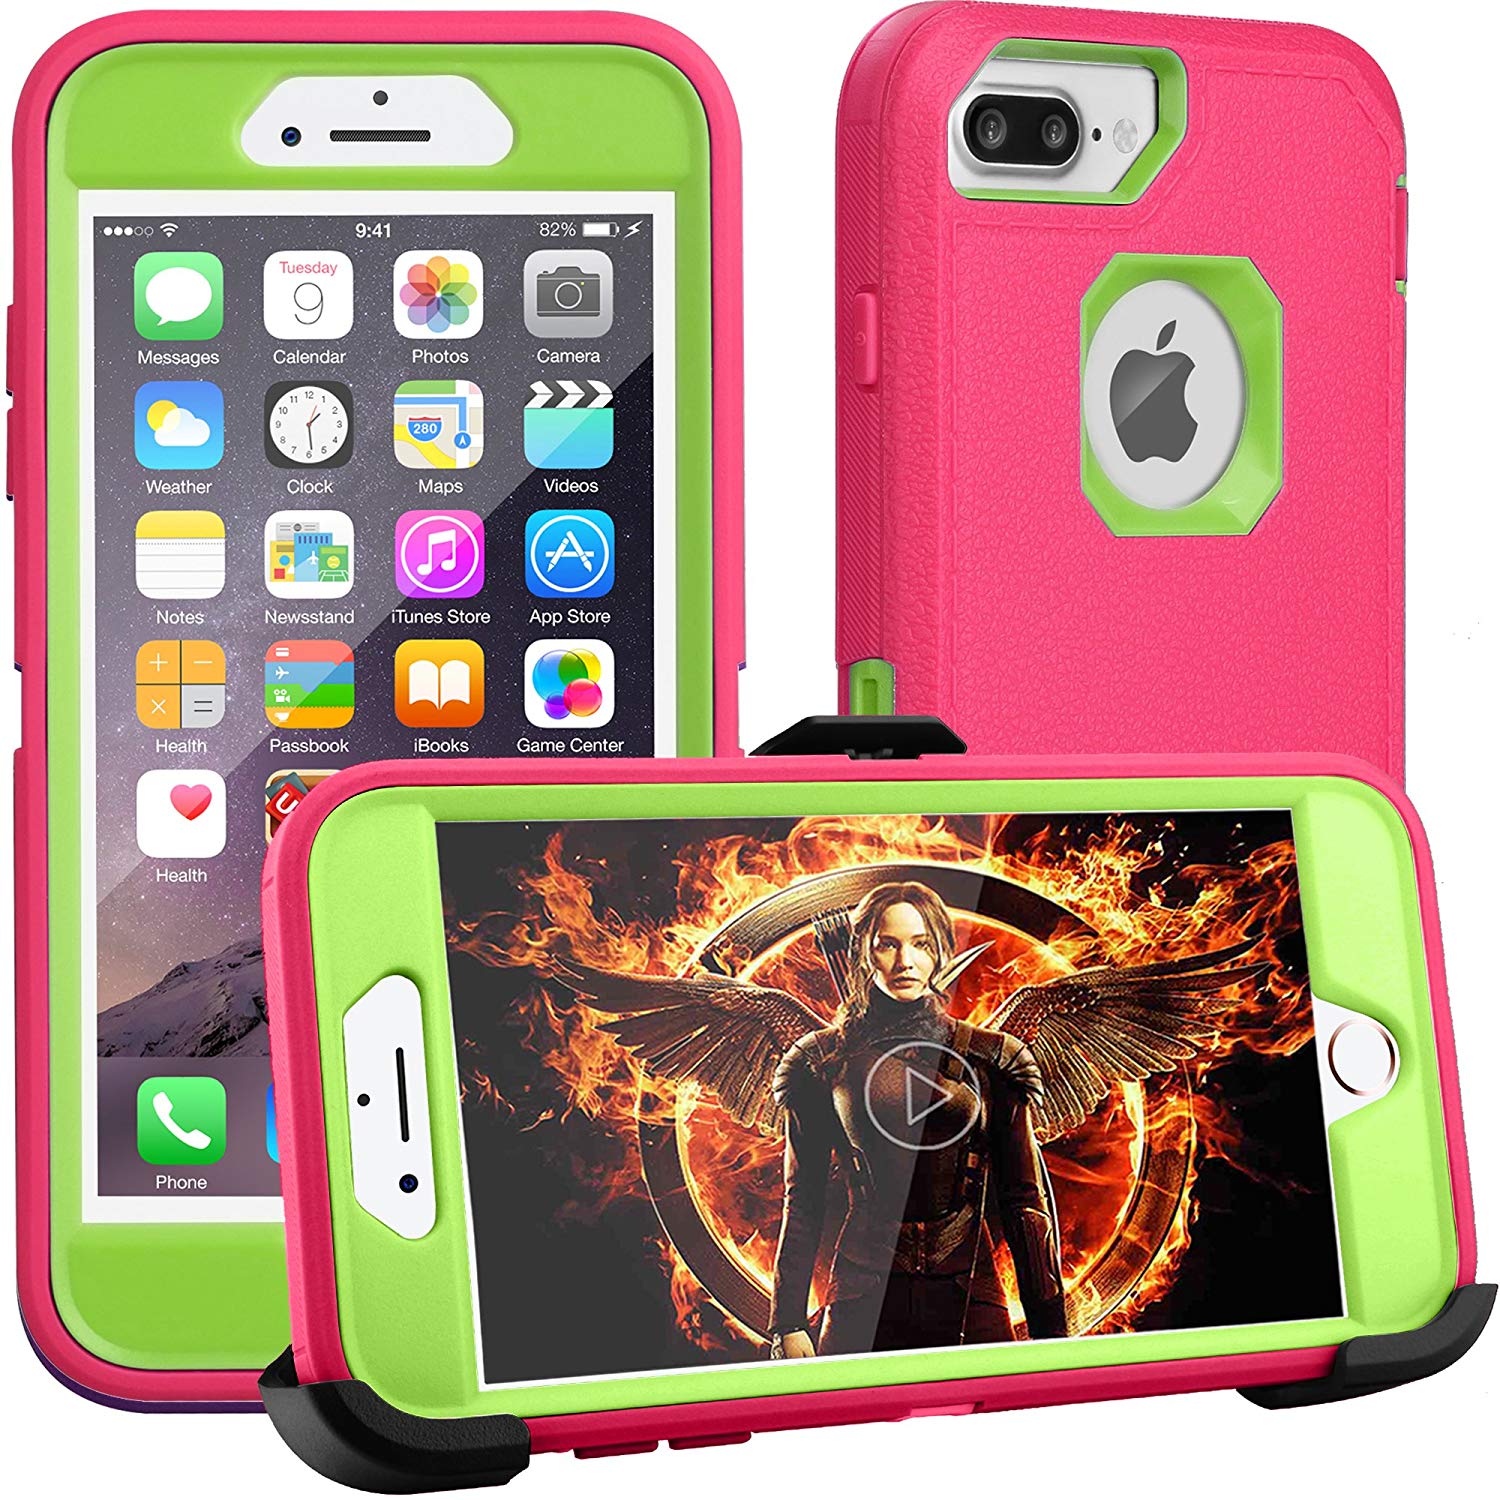 iPhone 8 Plus Case,iPhone 7 Plus Case,iPhone 6 Plus Case,FOGEEK[Dust-Proof]Belt-Clip Heavy Duty Kickstand Cover[Shockproof] PC+TPU for Apple iPhone 7 Plus, iPhone 6/6s Plus(Rose and Green) …